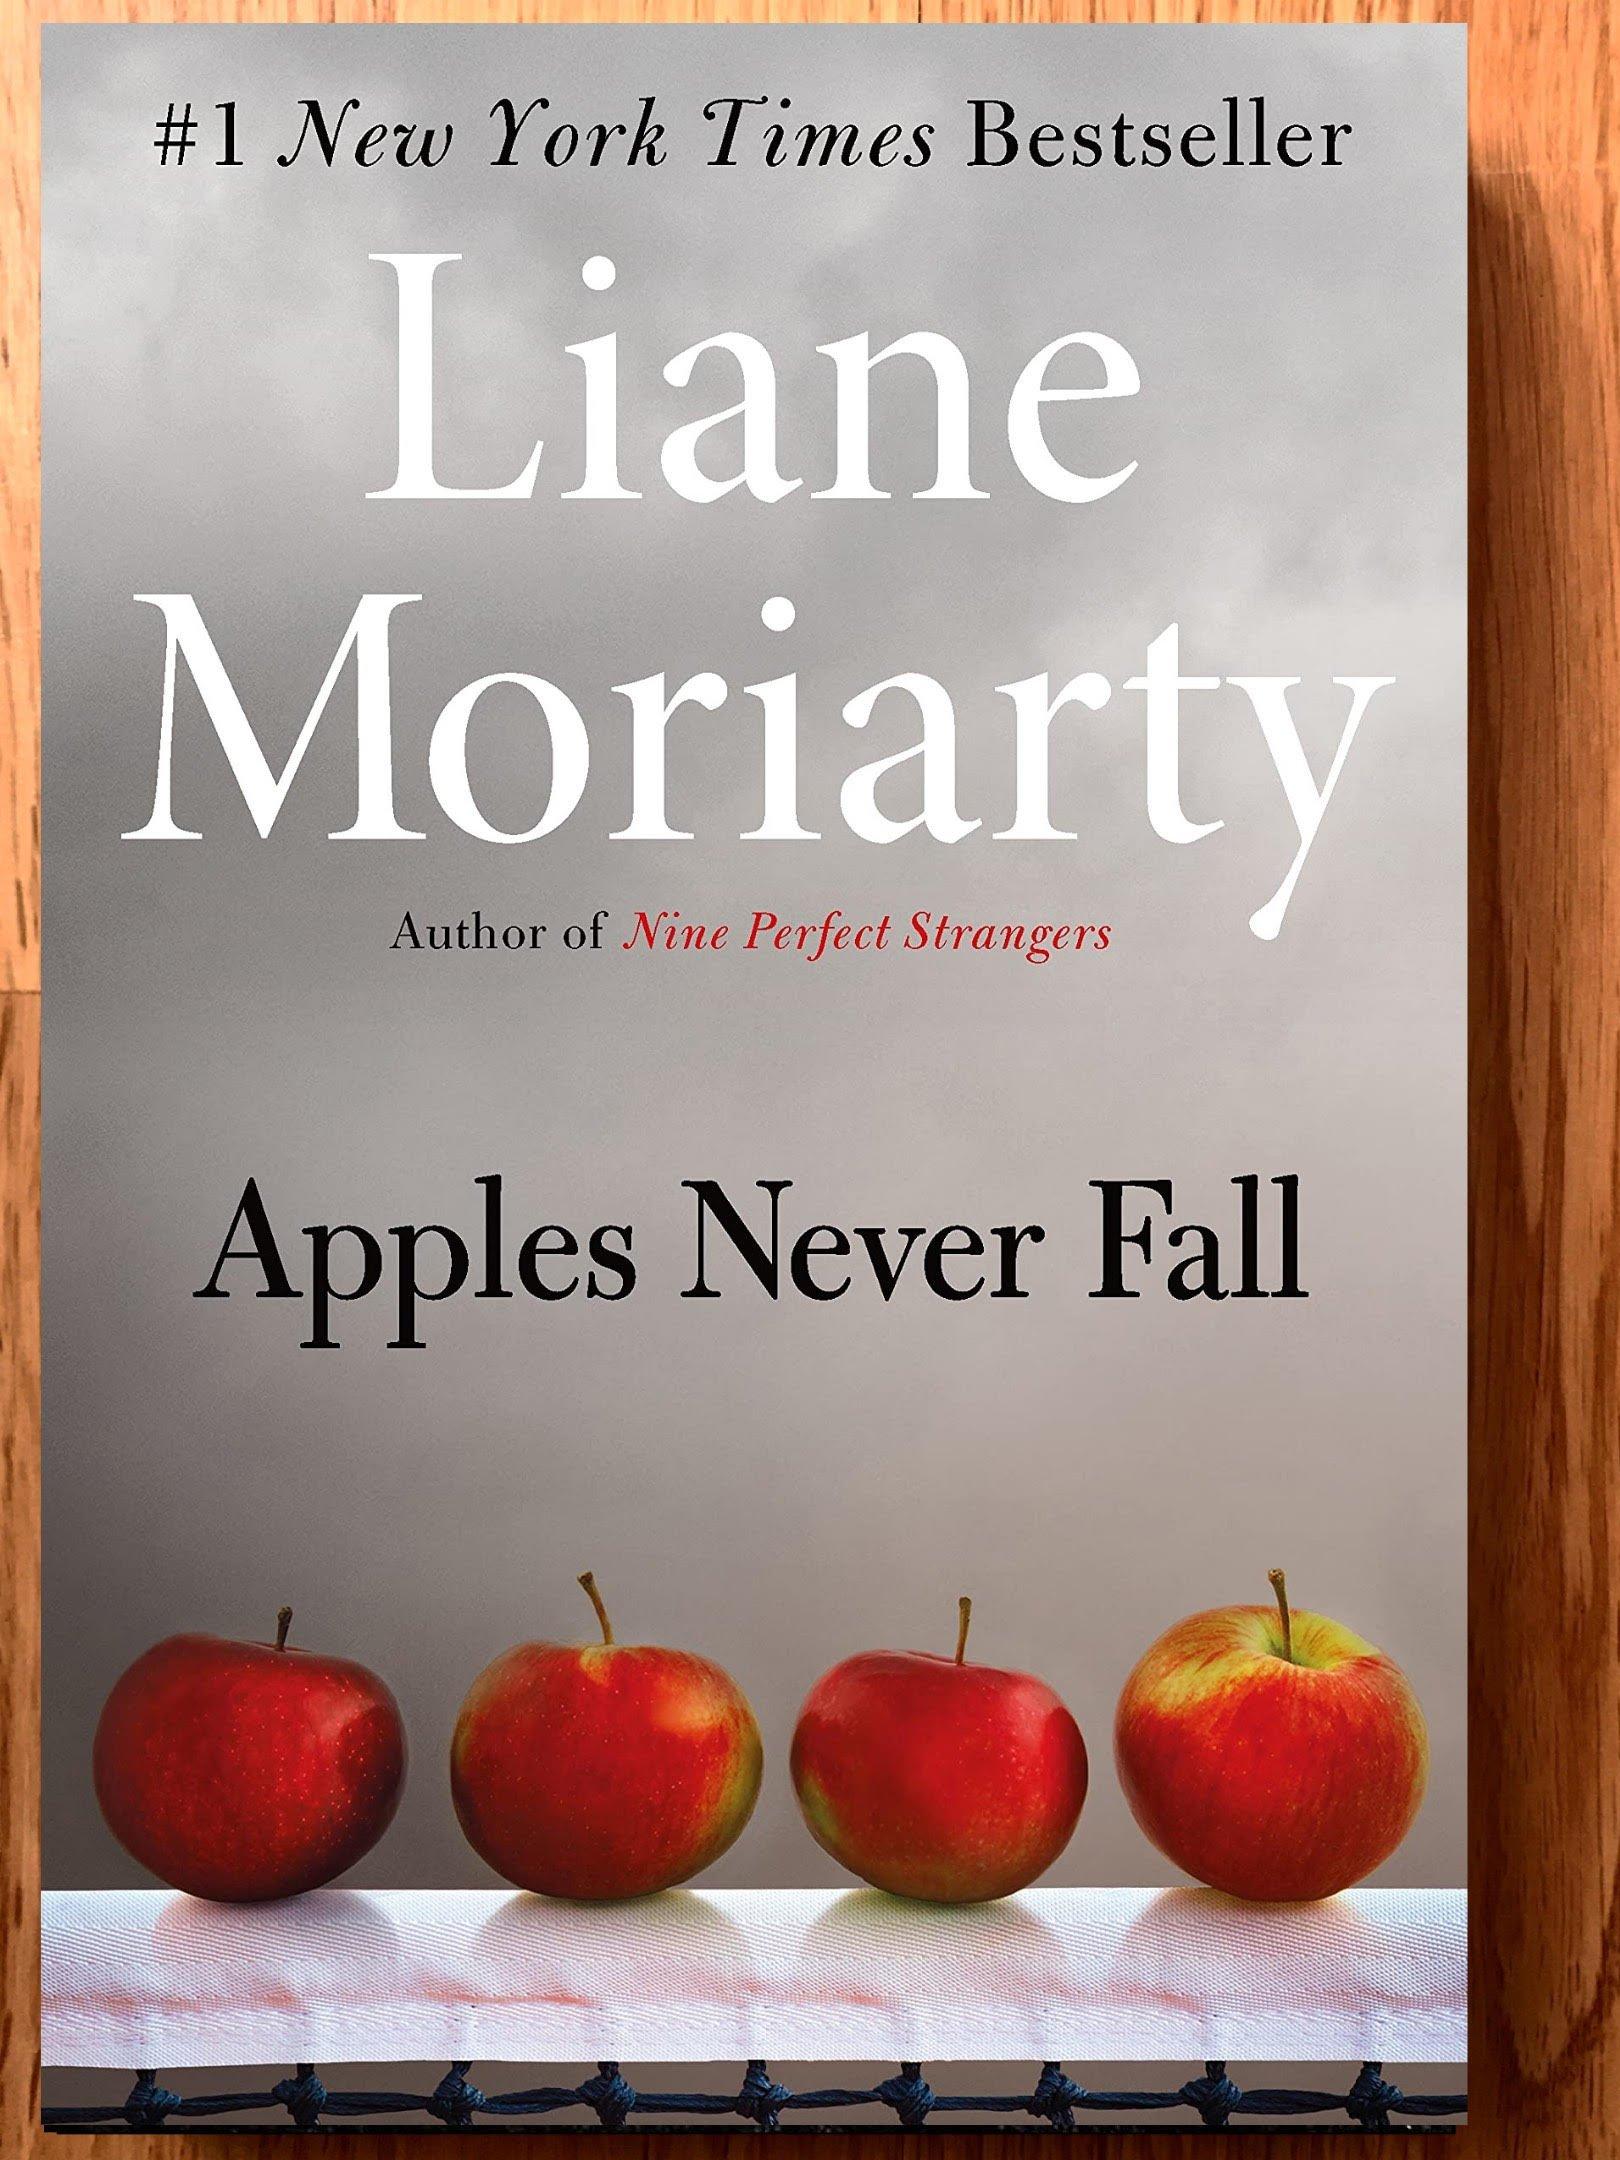 Book Discussion: Apples Never Fall by Liane Moriarty